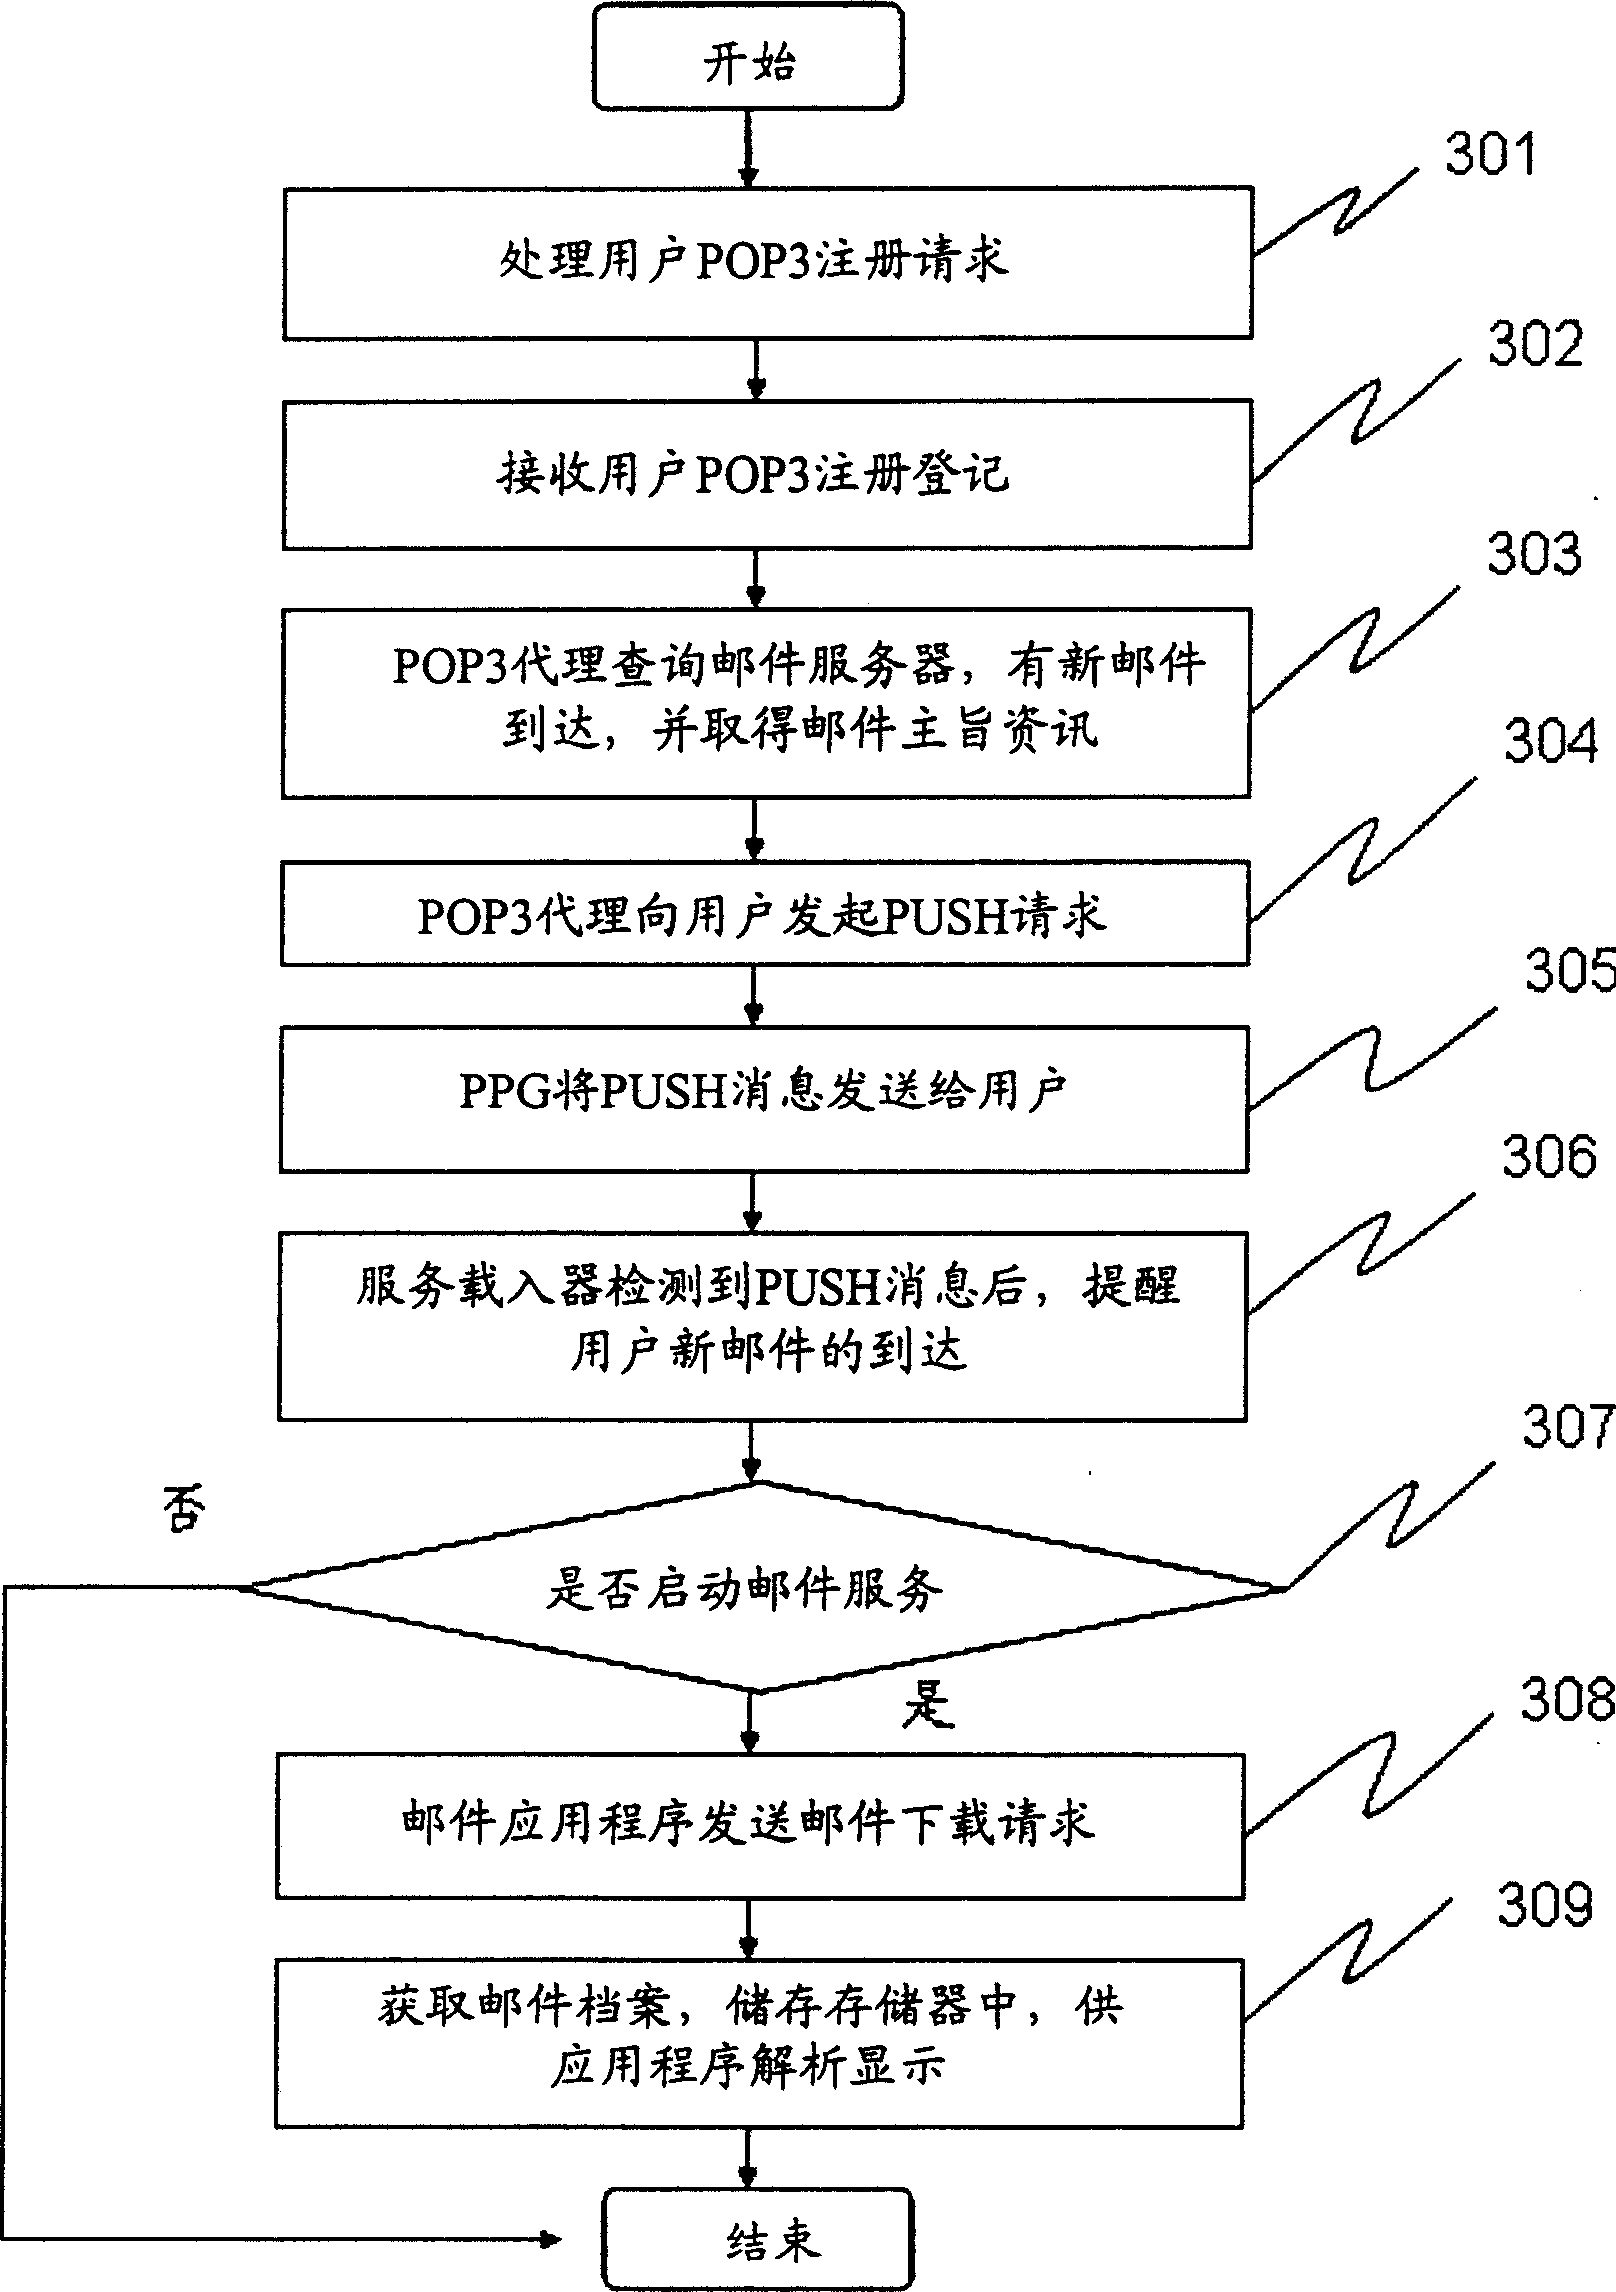 Realizing method for automatic receiving mobile phone mail